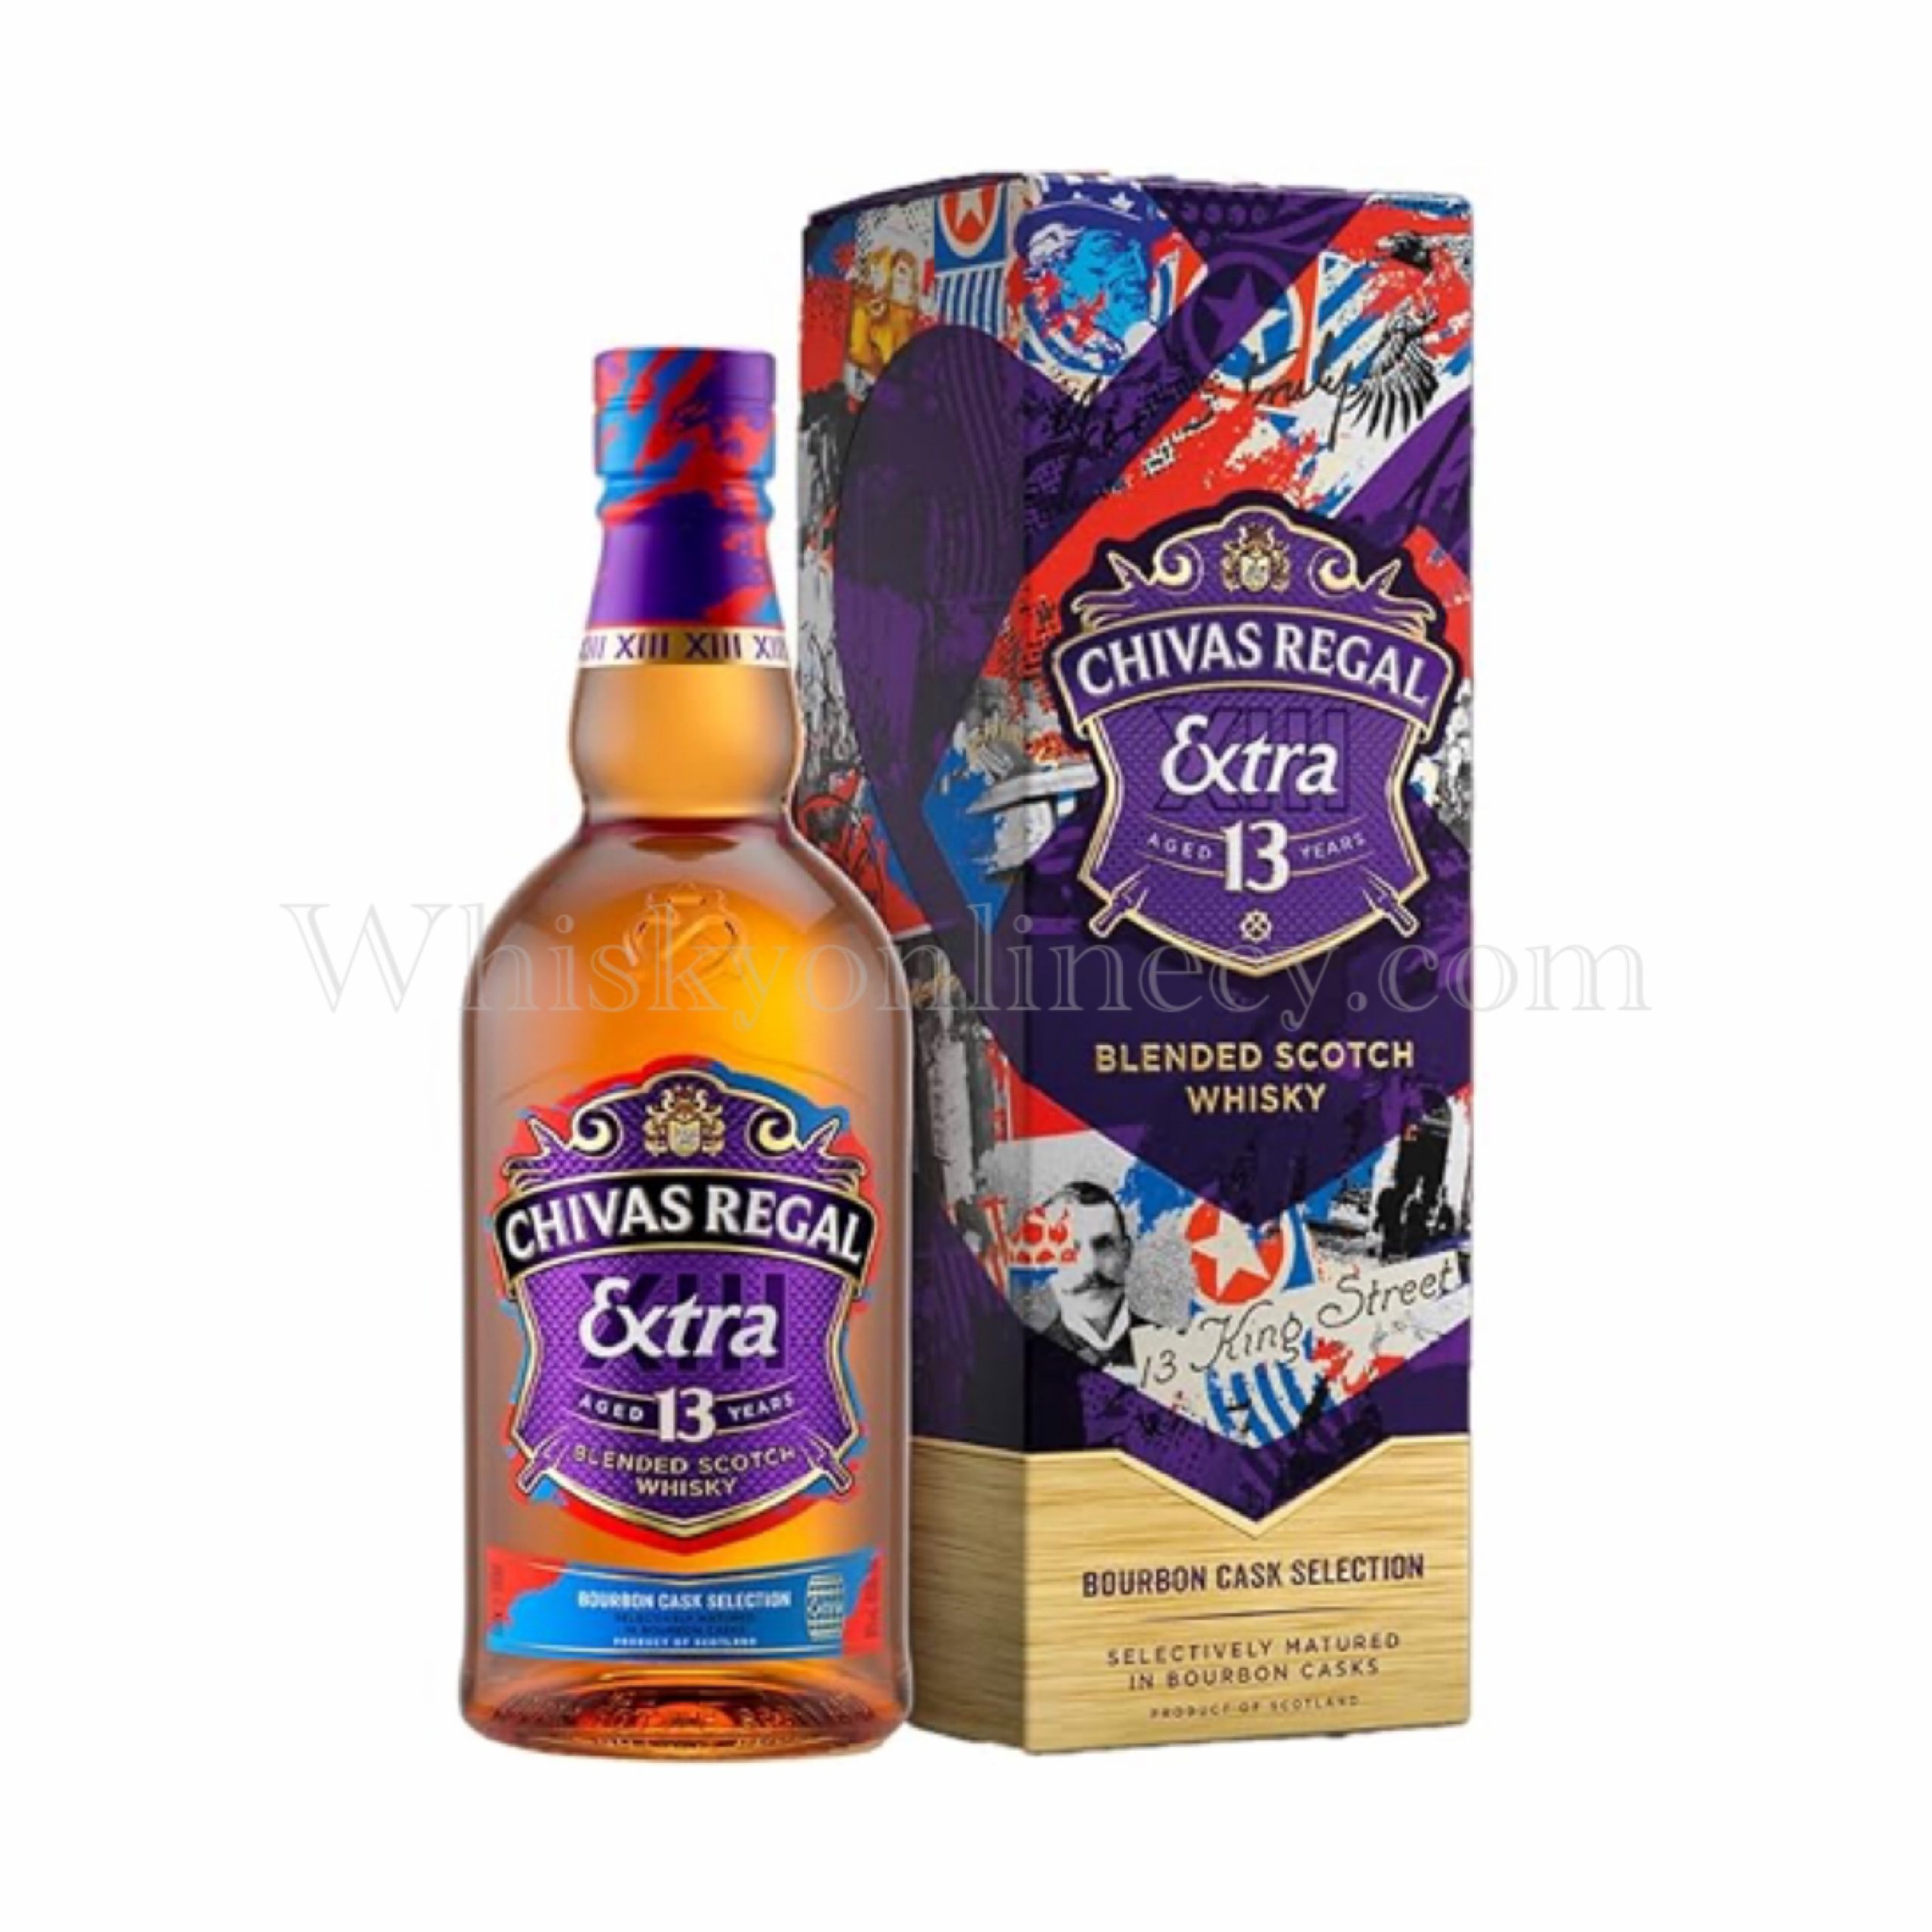 Chivas finishes part of blend in Irish whiskey casks - The Spirits Business